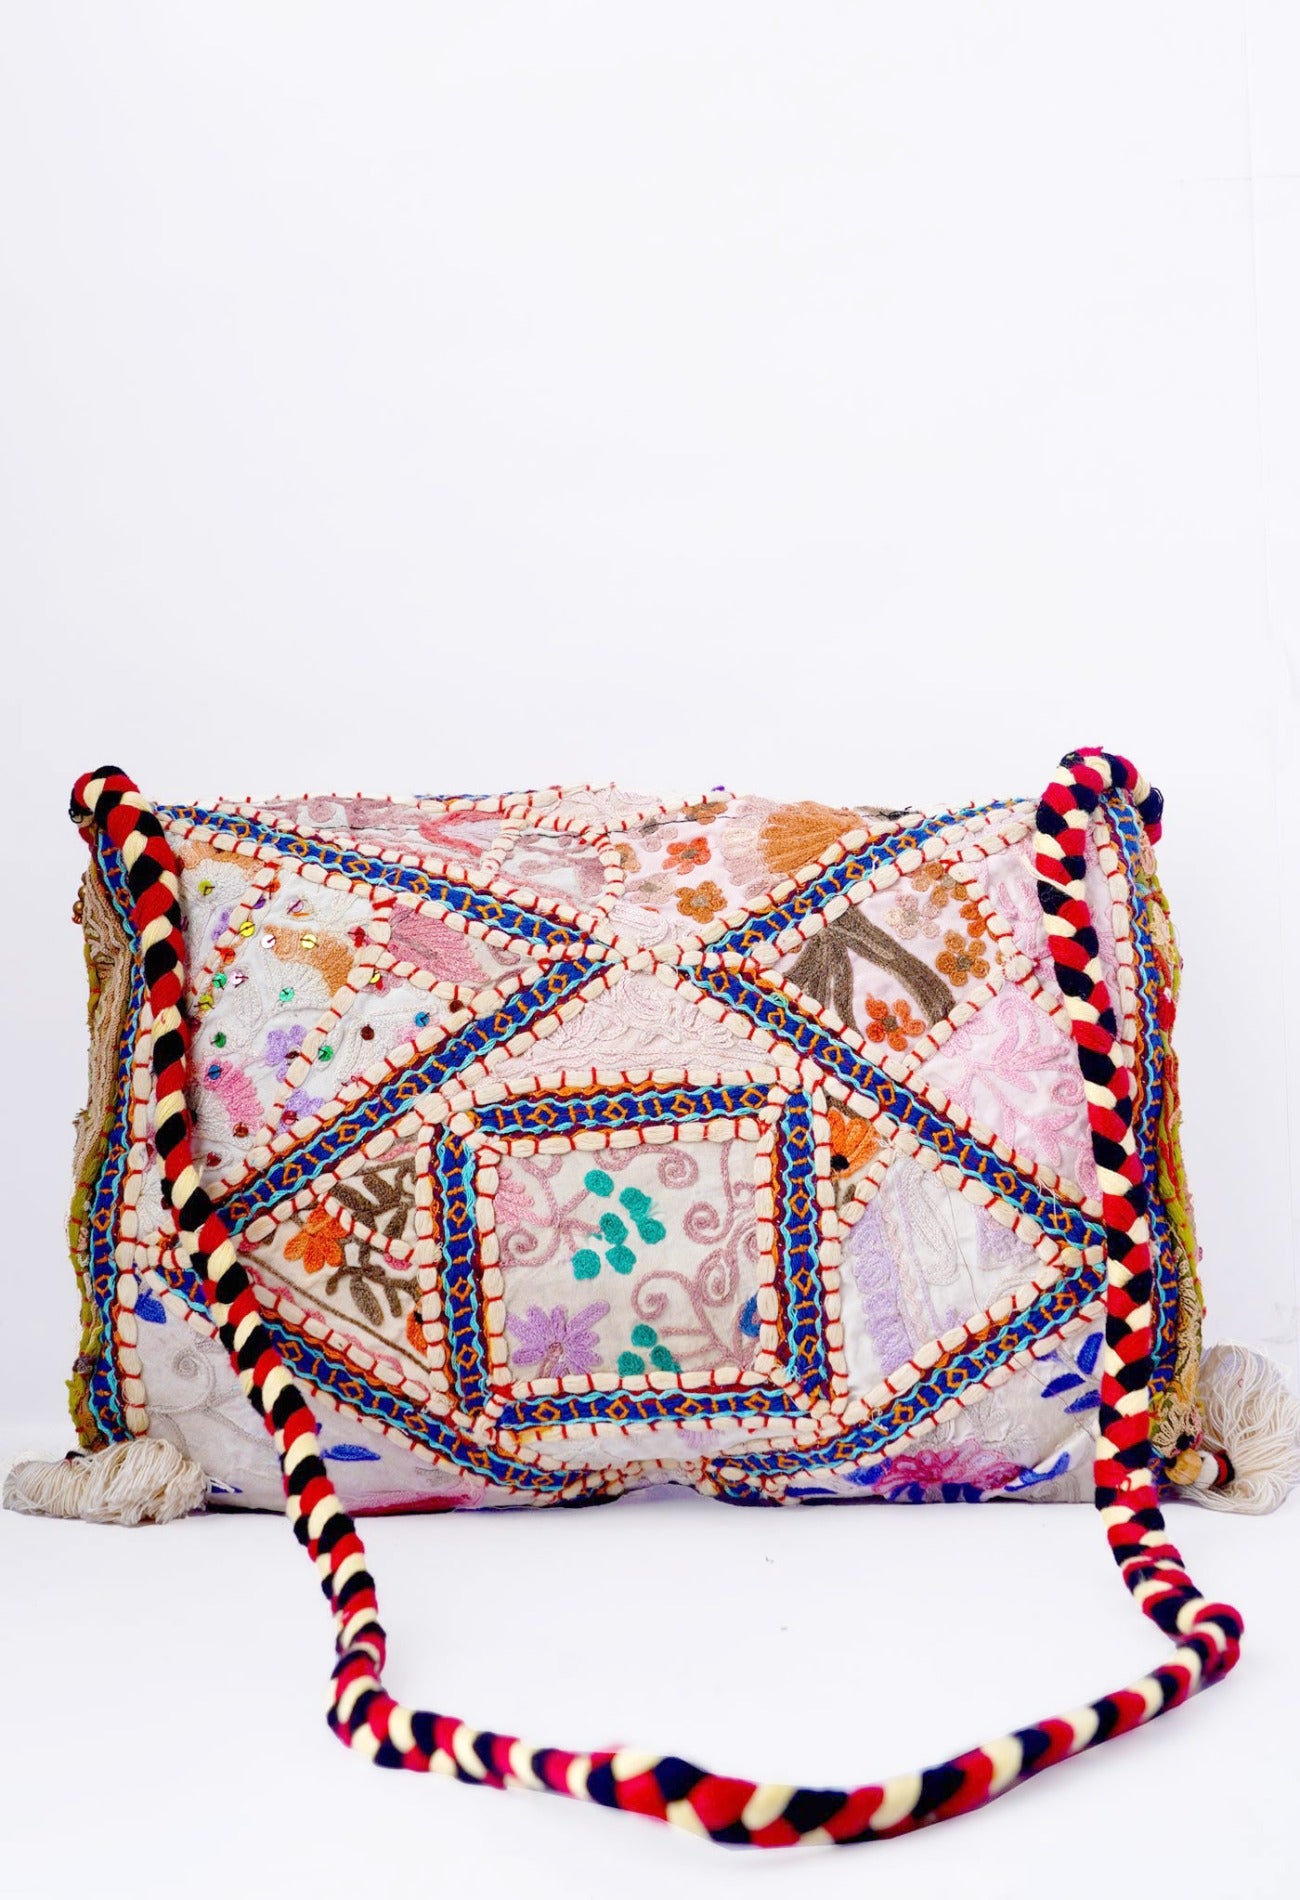 Online Shopping for Ivory Indian Handicraft Embroidered Hand Bag with Weaving from Rajasthan at Unnatisilks.com India_x000D_
Online Shopping for Ivory Indian Handicraft Embroidered Hand Bag with Weaving from Rajasthan at Unnatisilks.com India_x000D_
Online Shopping for Ivory Indian Handicraft Embroidered Hand Bag with Weaving from Rajasthan at Unnatisilks.com India_x000D_
